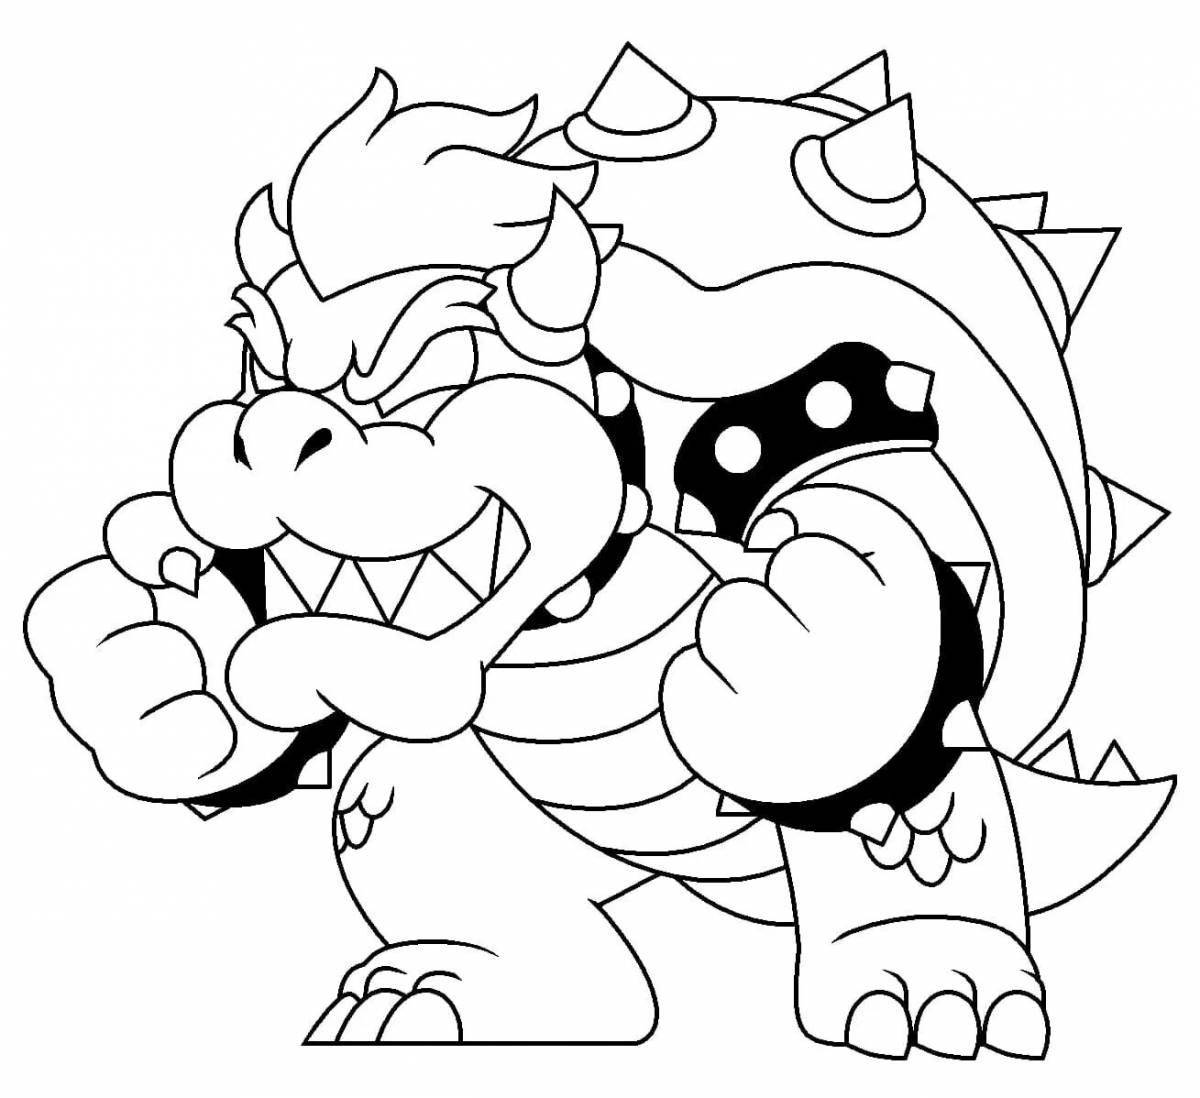 Funny mario and sonic coloring book